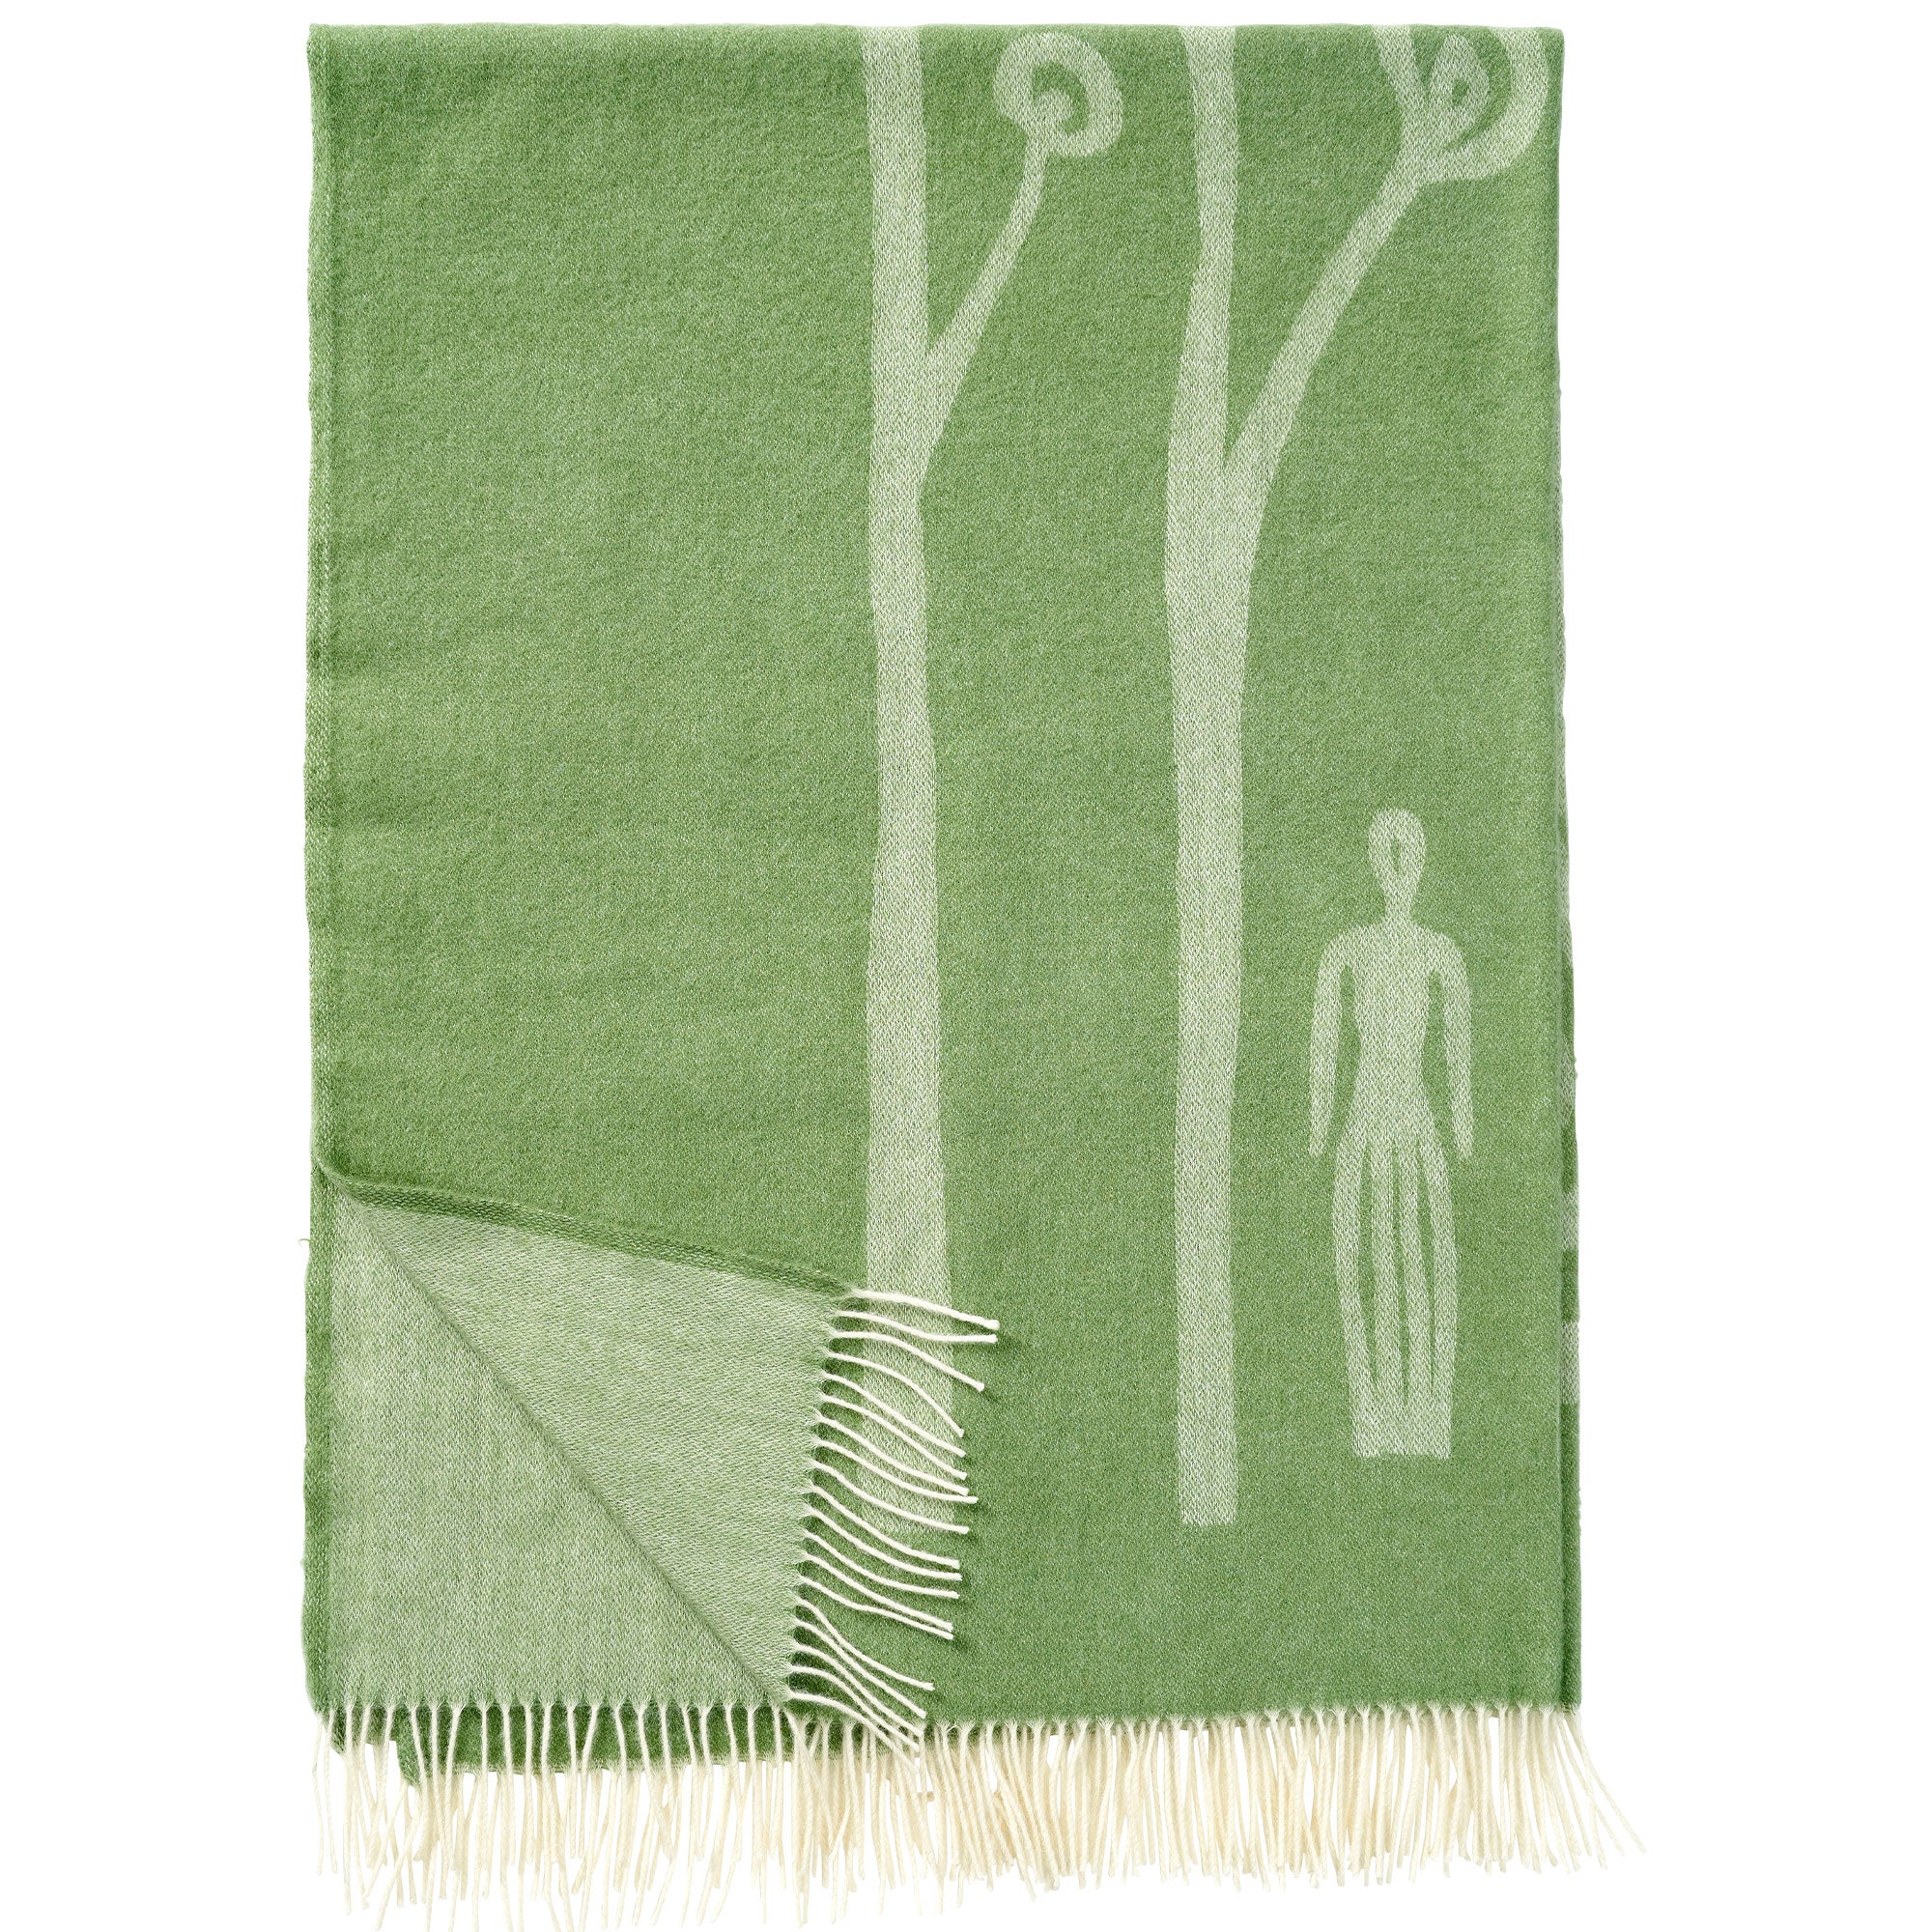 In The Woods Green 130x200cm Premium Wool Throw